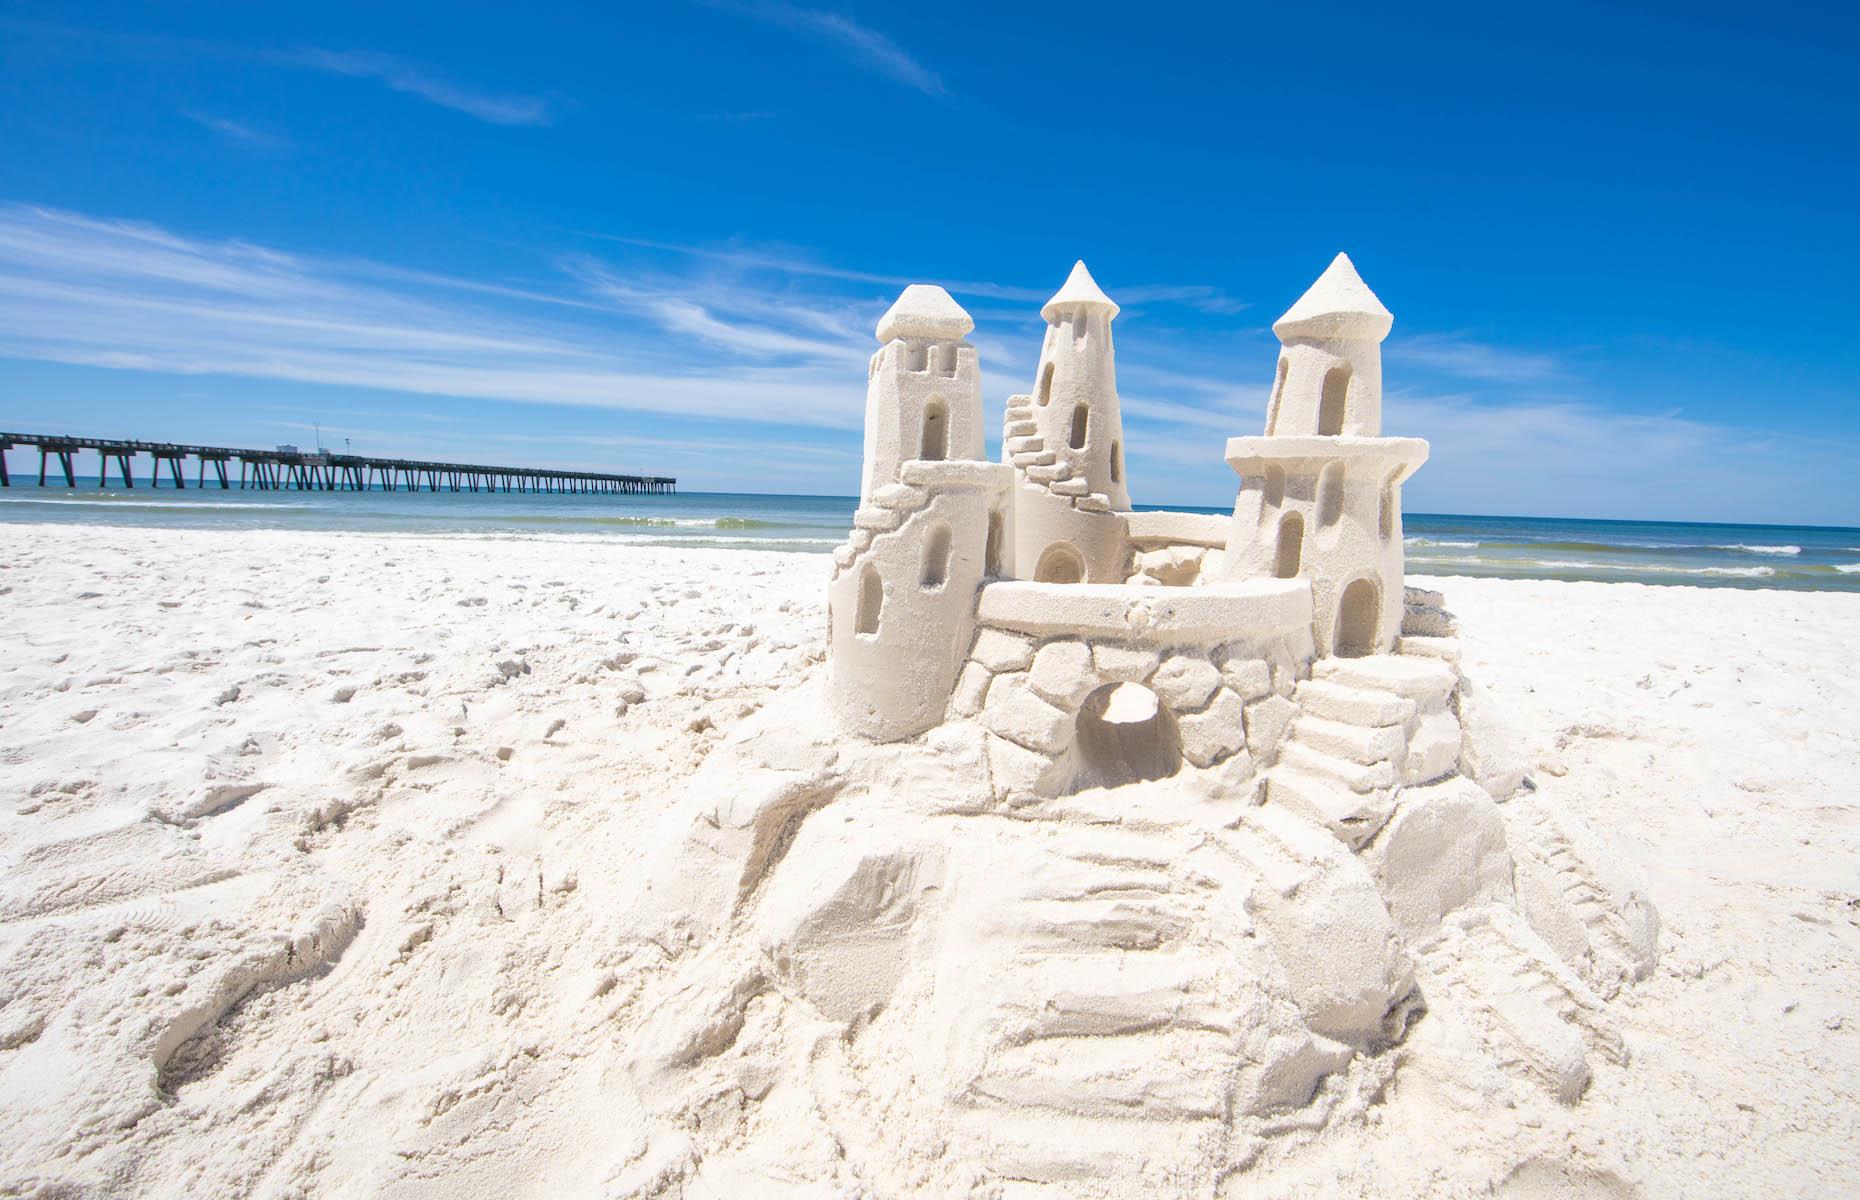 Road trippers with a keen eye who travel along the Gulf Coast Highway – a corridor that hugs the Gulf of Mexico coastline in Northwest Florida’s Walton County – will spot larger-than-life sandcastles dotted on the buttery shores. It’s often nicknamed the ‘Sandcastle Coast’ for its moist sand with an ideal texture for castle building. One of the most beautiful beaches on this stretch is Panama Beach with its pristine white sand.